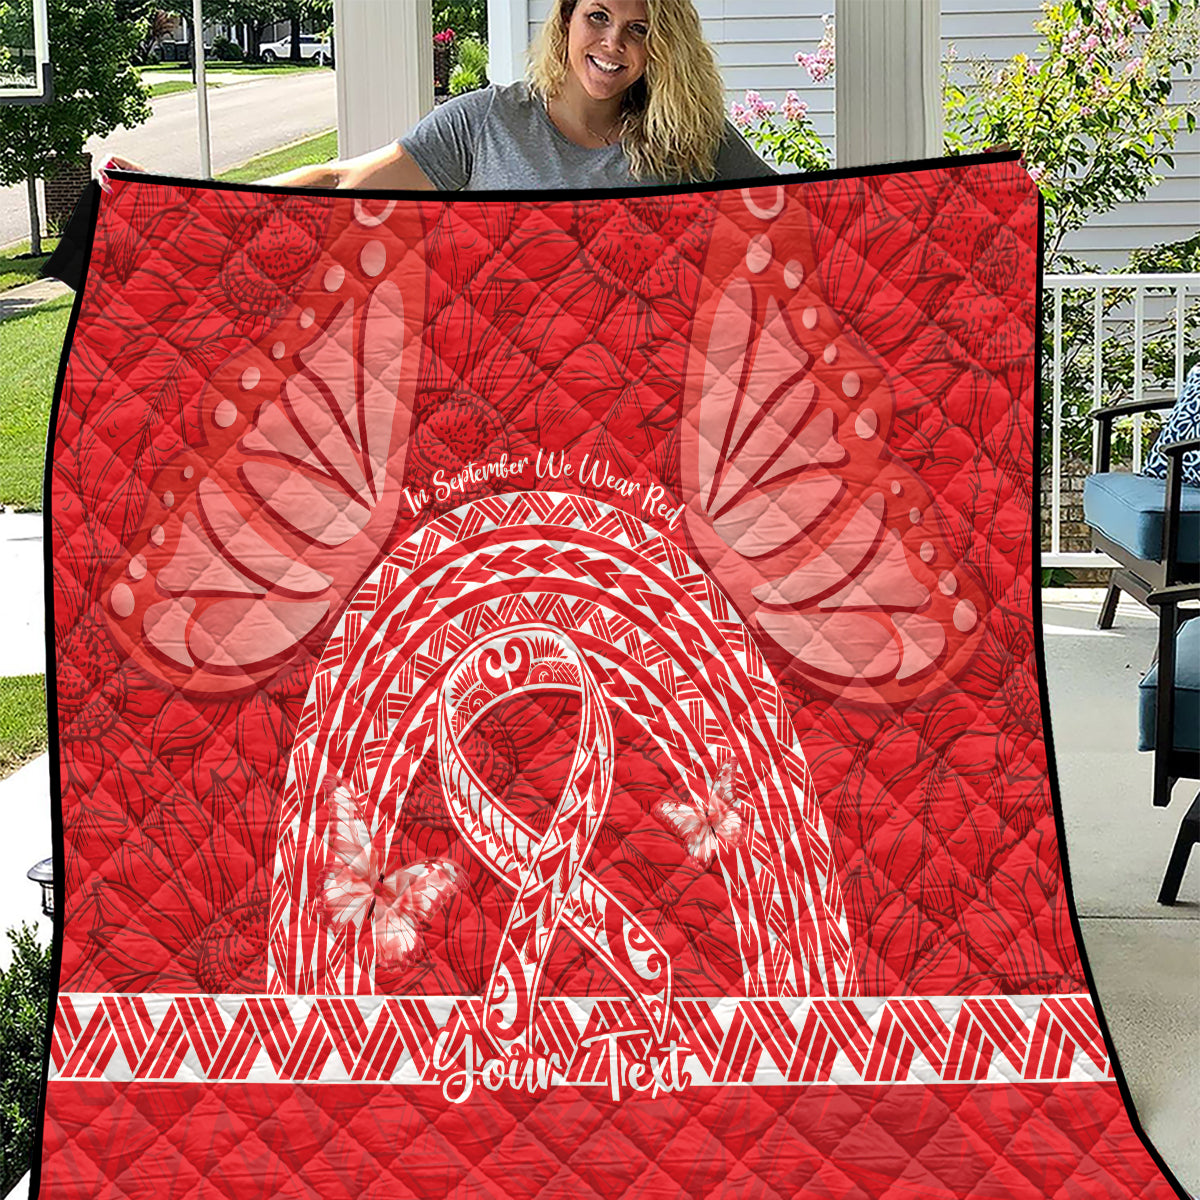 Personalised In September We Wear Red Quilt Polynesia Blood Cancer Awareness